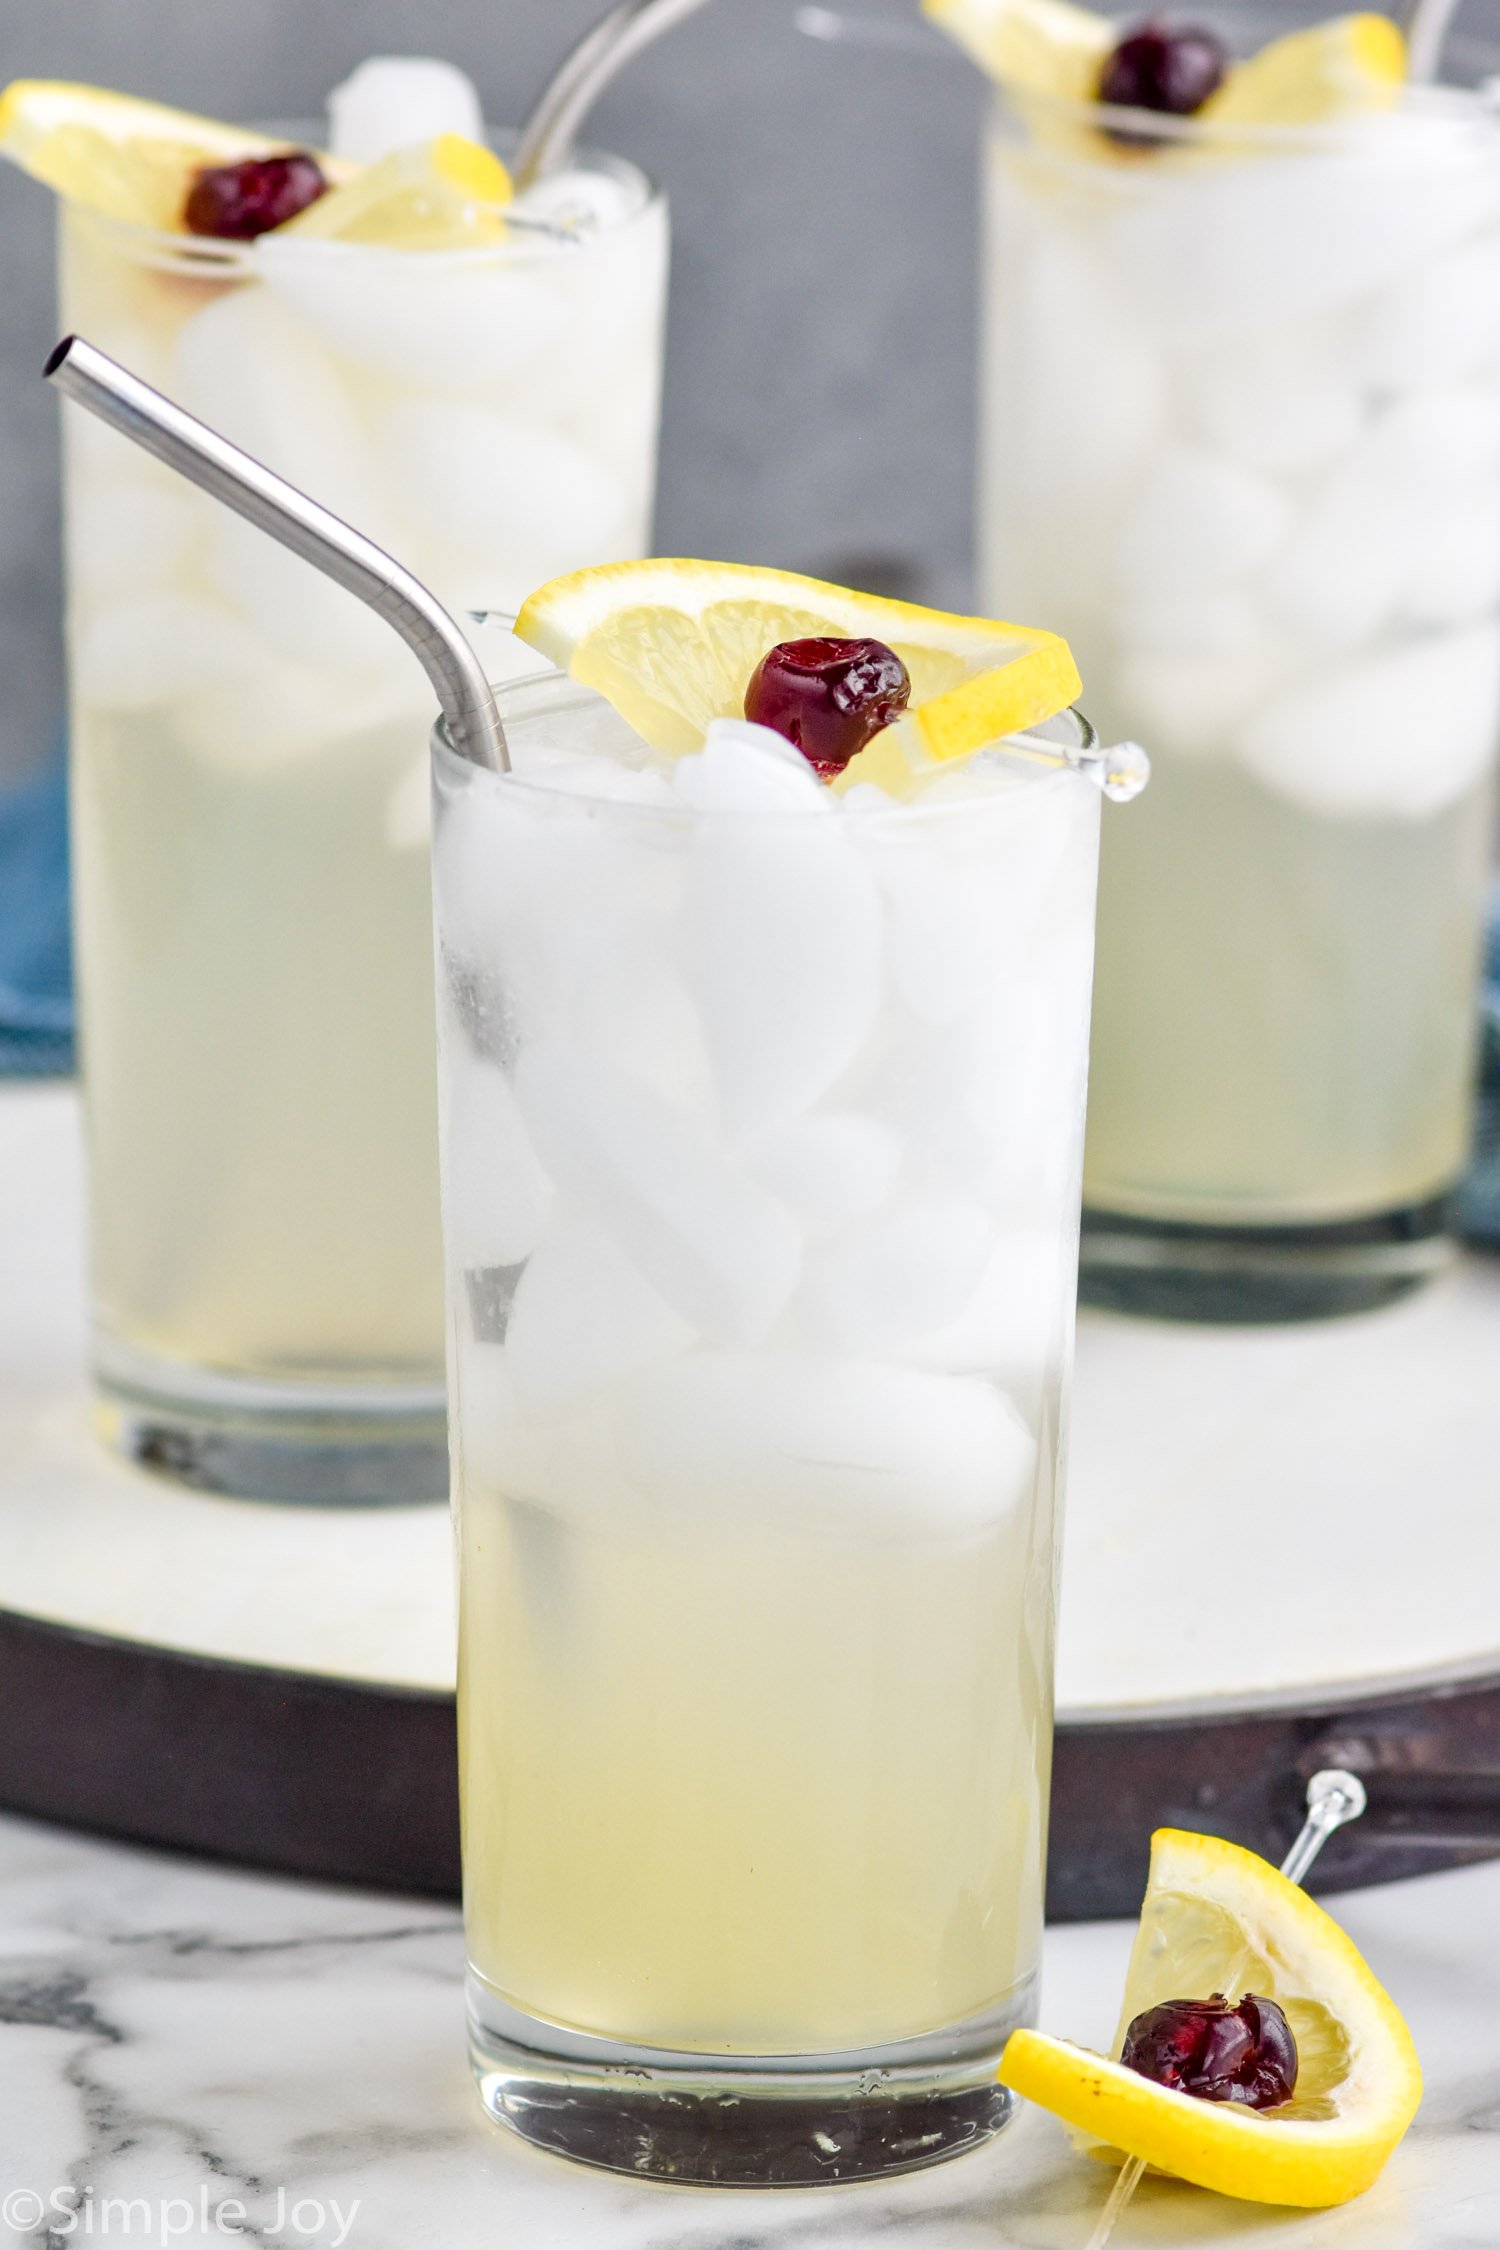 Three glasses of Tom Collins cocktails with ice and garnished with a lemon wedge and cherry.